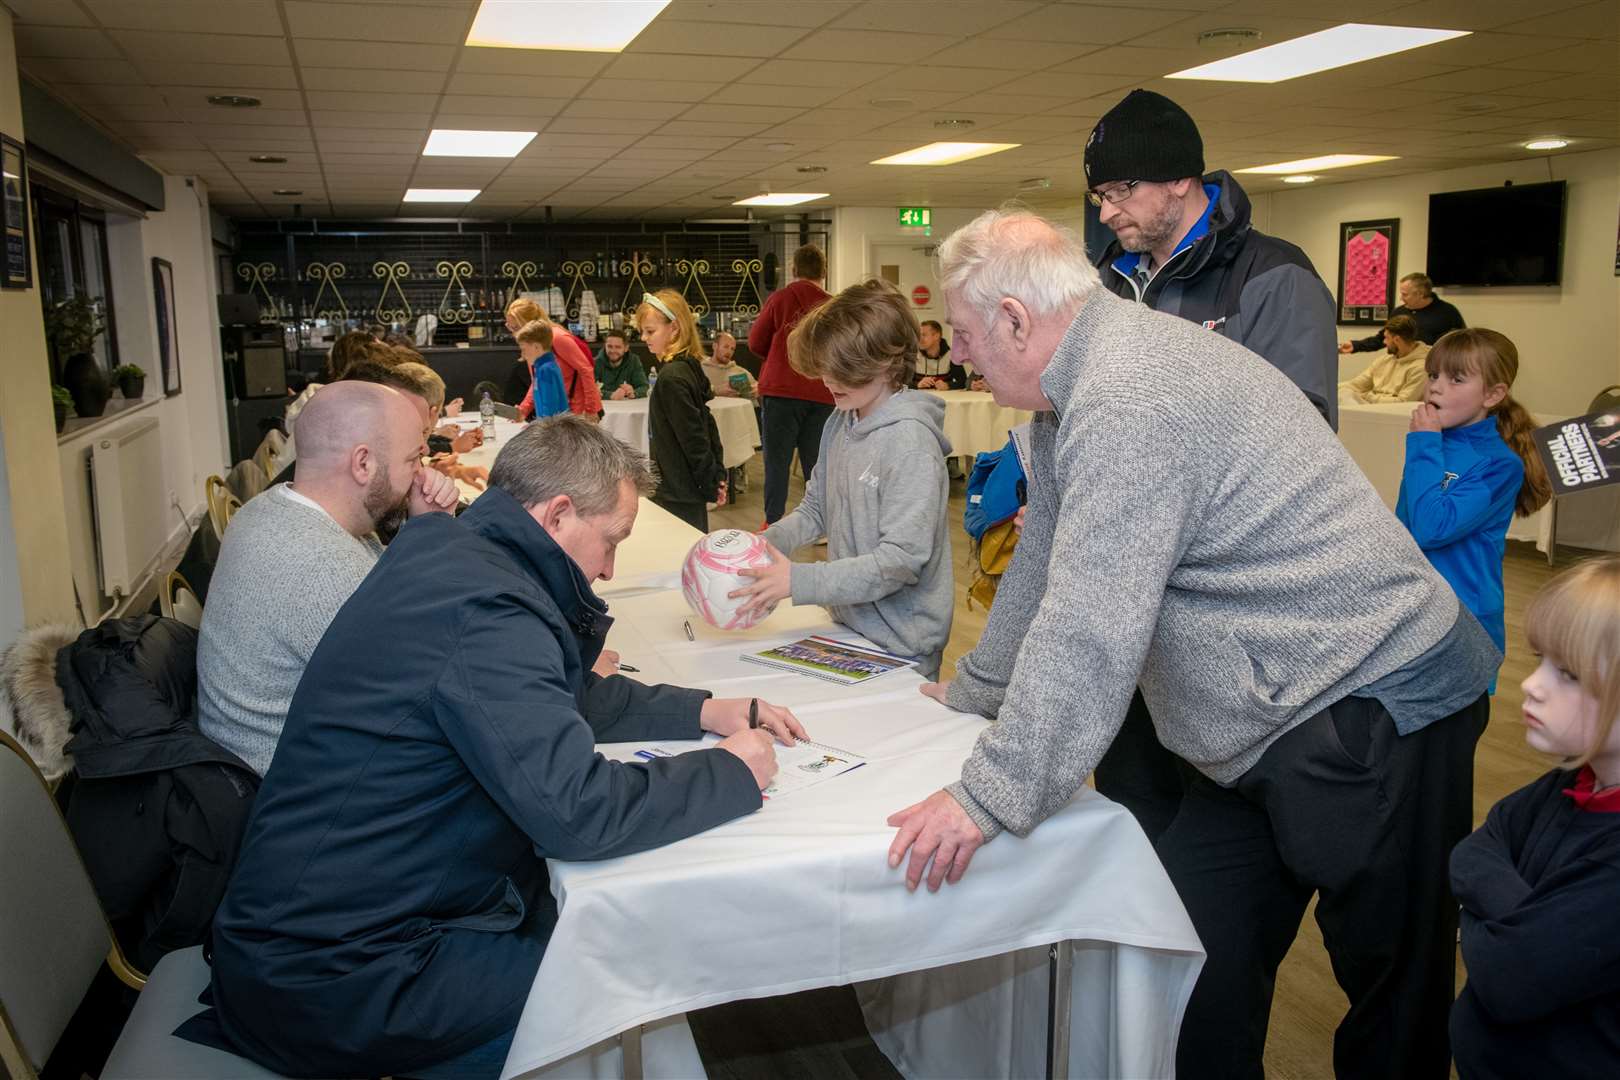 The signing was held in the Highlander Lounge at the Caledonian Stadium. Picture: Callum Mackay